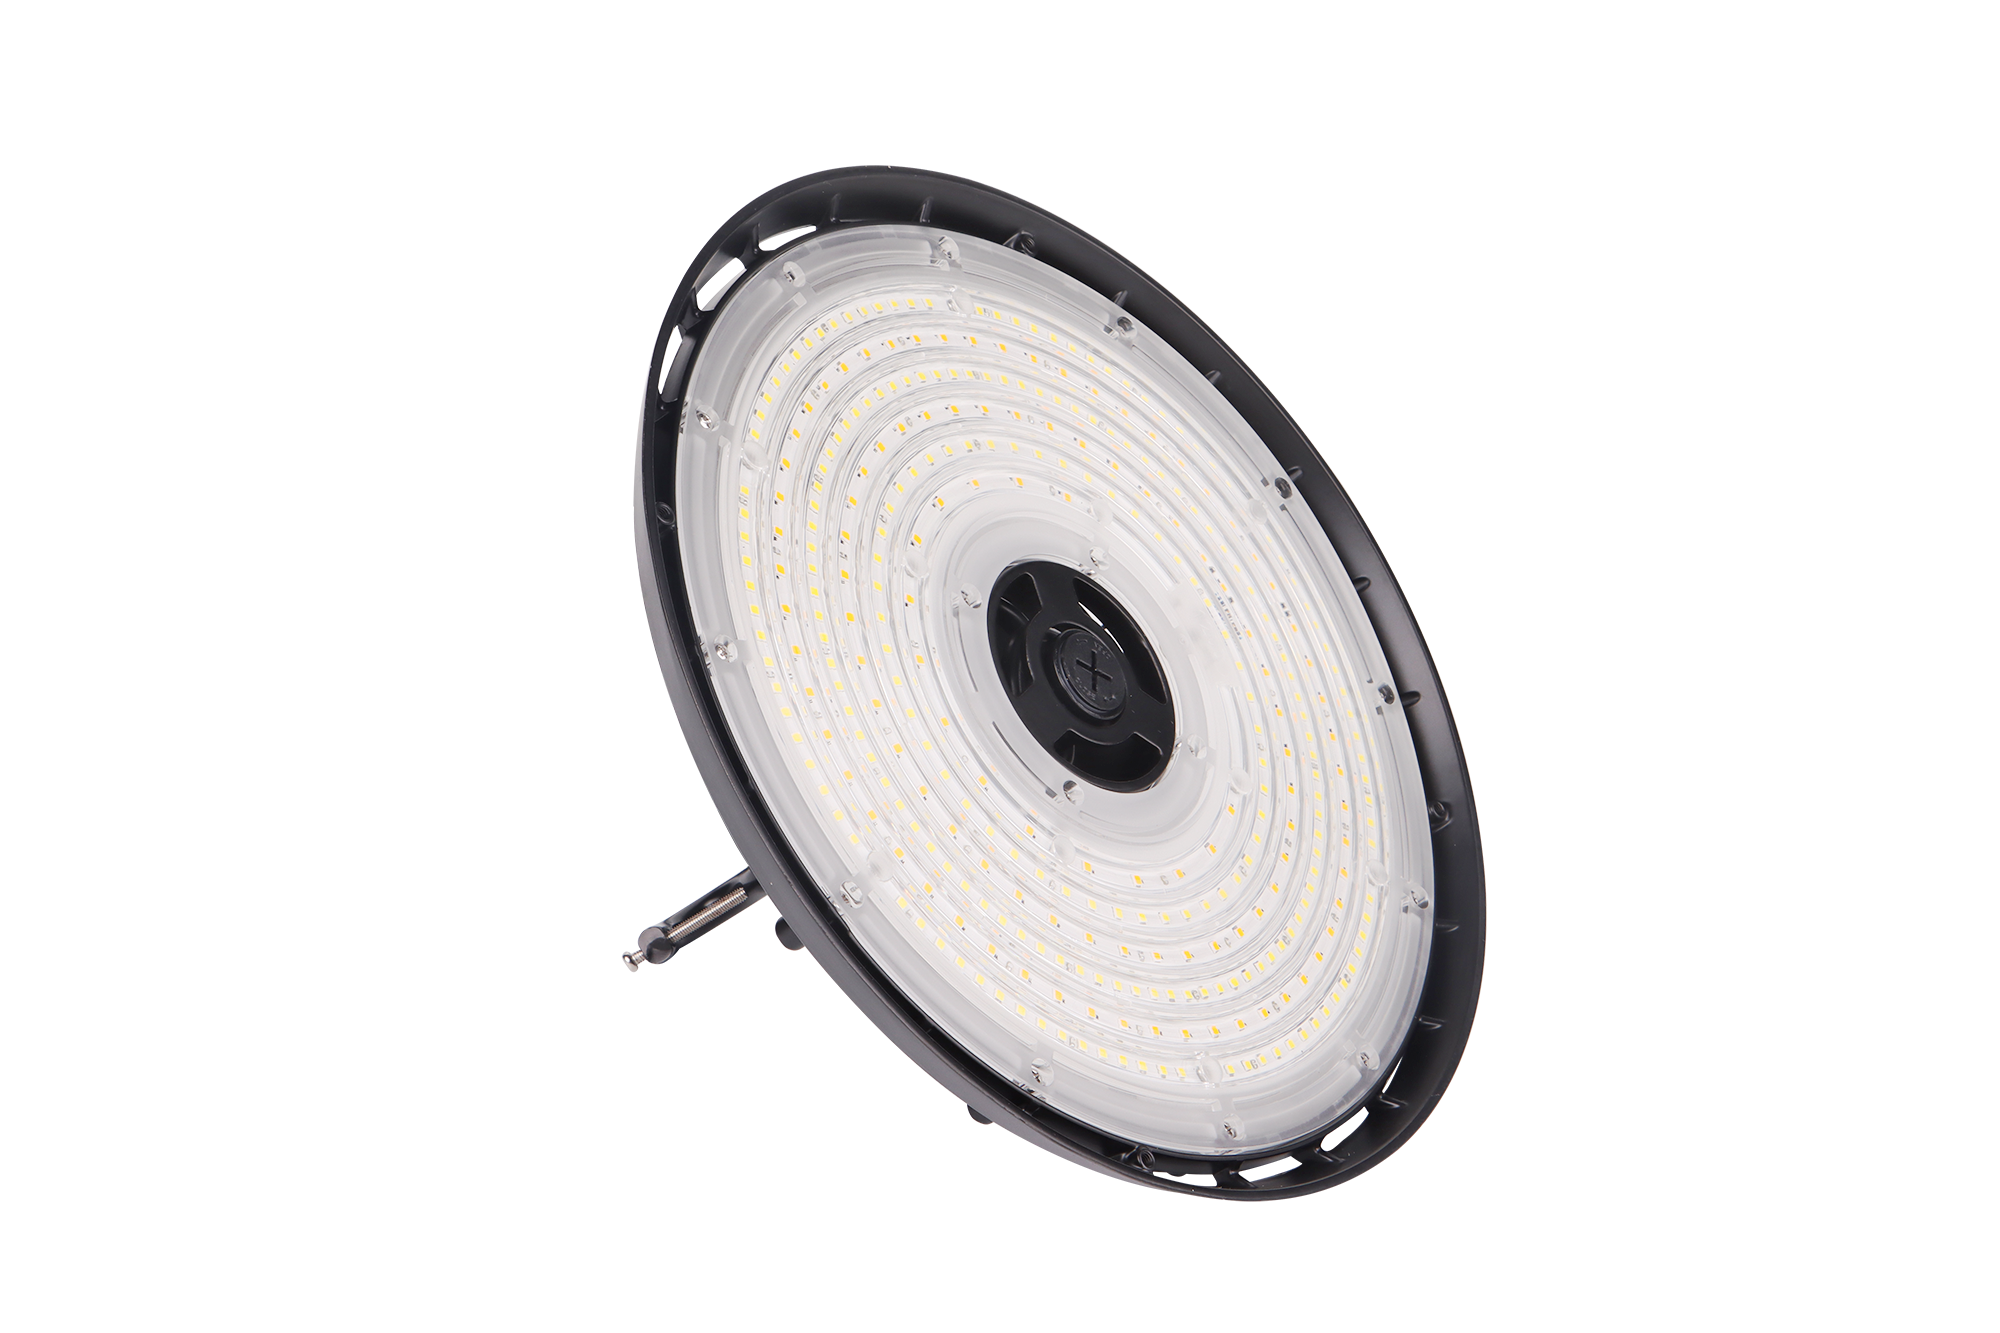 150W Tunable UFO LED High Bay Light - Selectable Wattage (150W /120W/100W) & CCT (4000K/5000K), 23,100 Lumens, 0-10V Dimmable - UL & DLC 5.1 Certified - Eco LED Lightings 